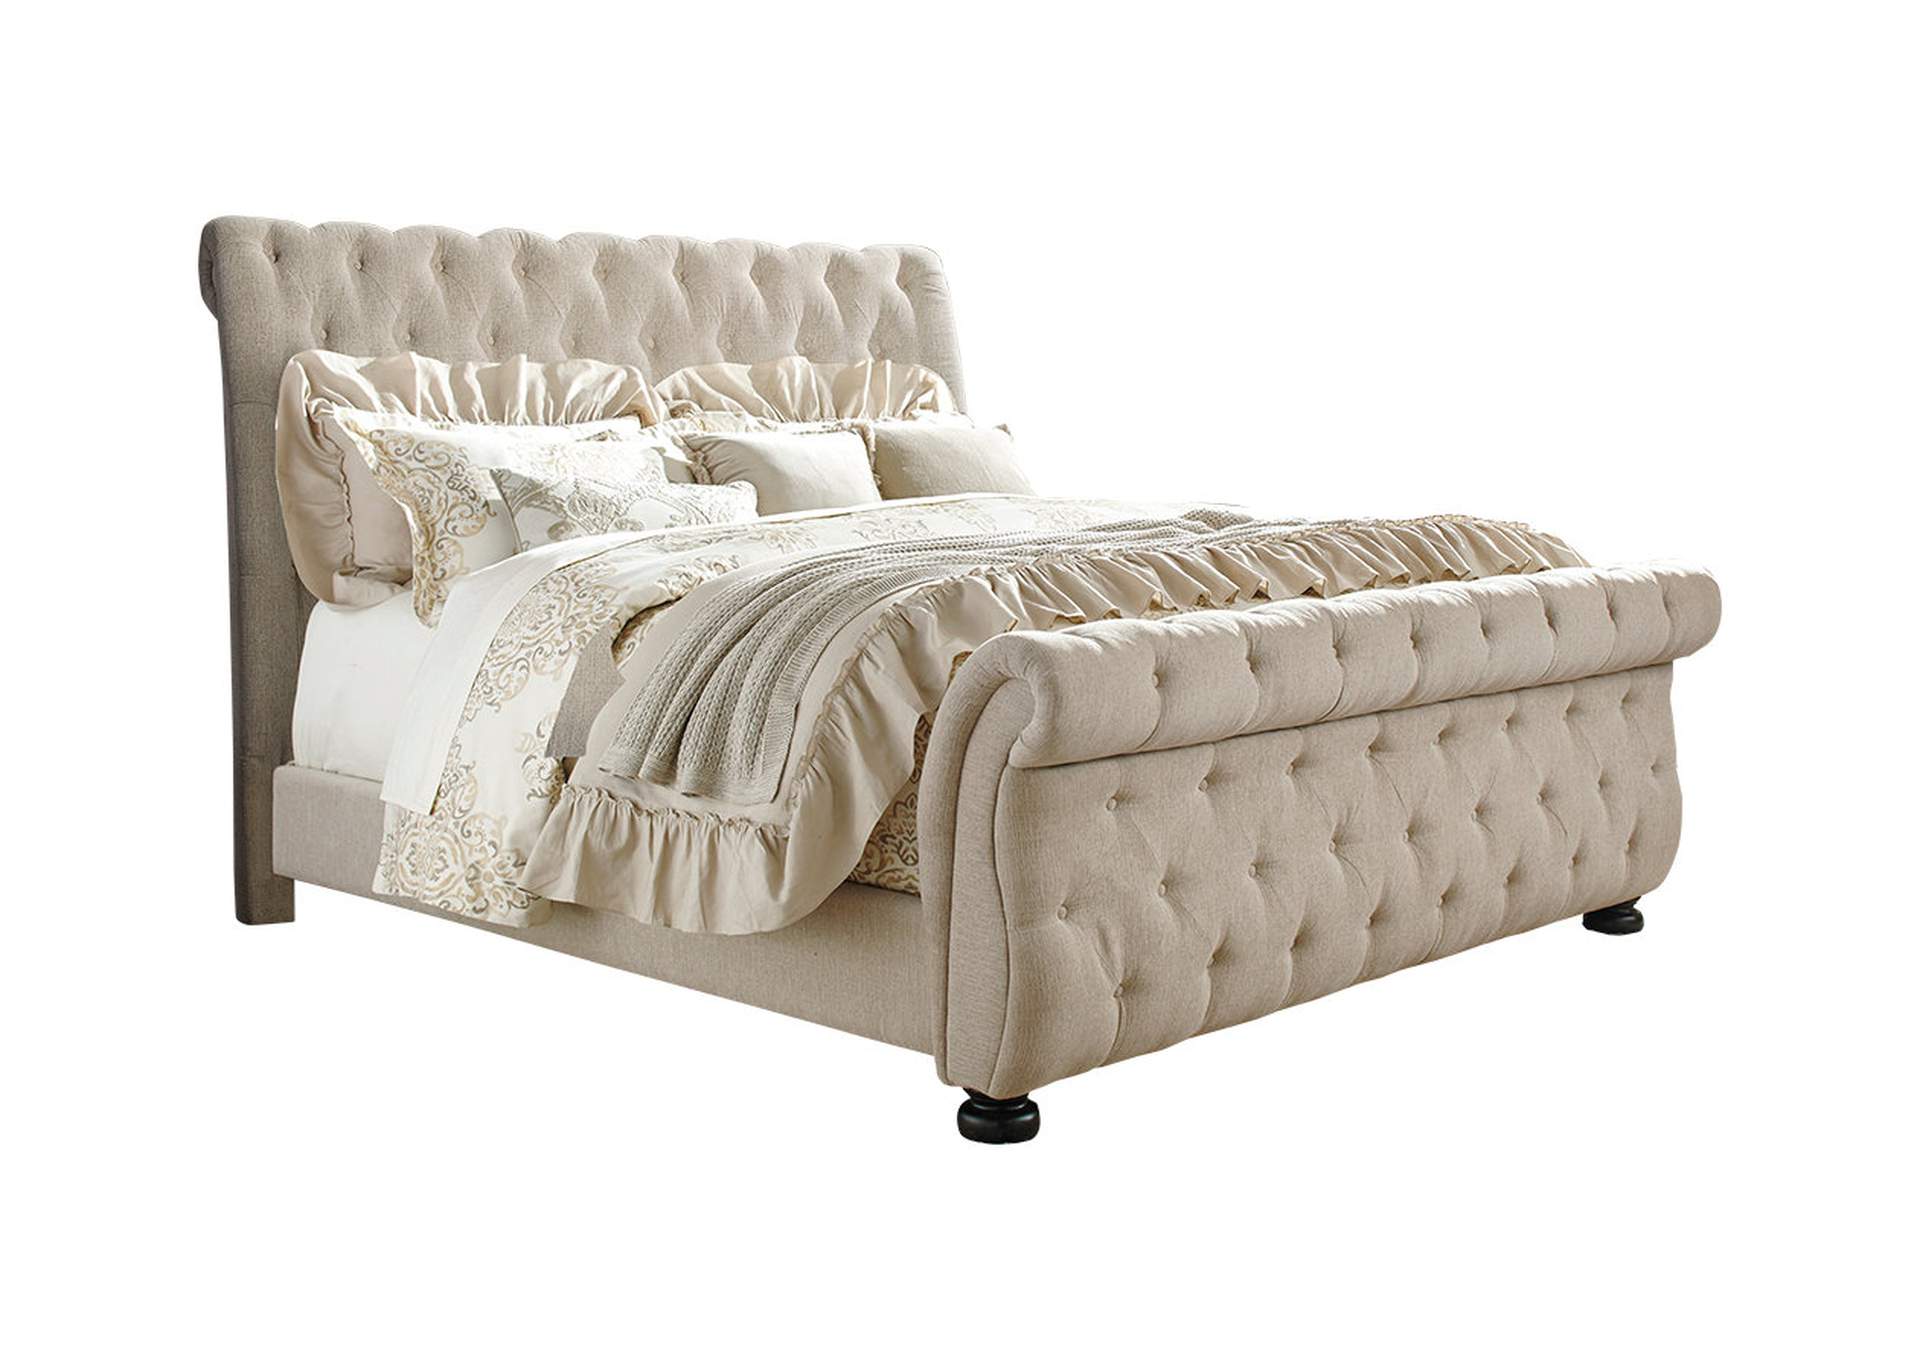 Willenburg California King Upholstered Sleigh Bed,Signature Design By Ashley